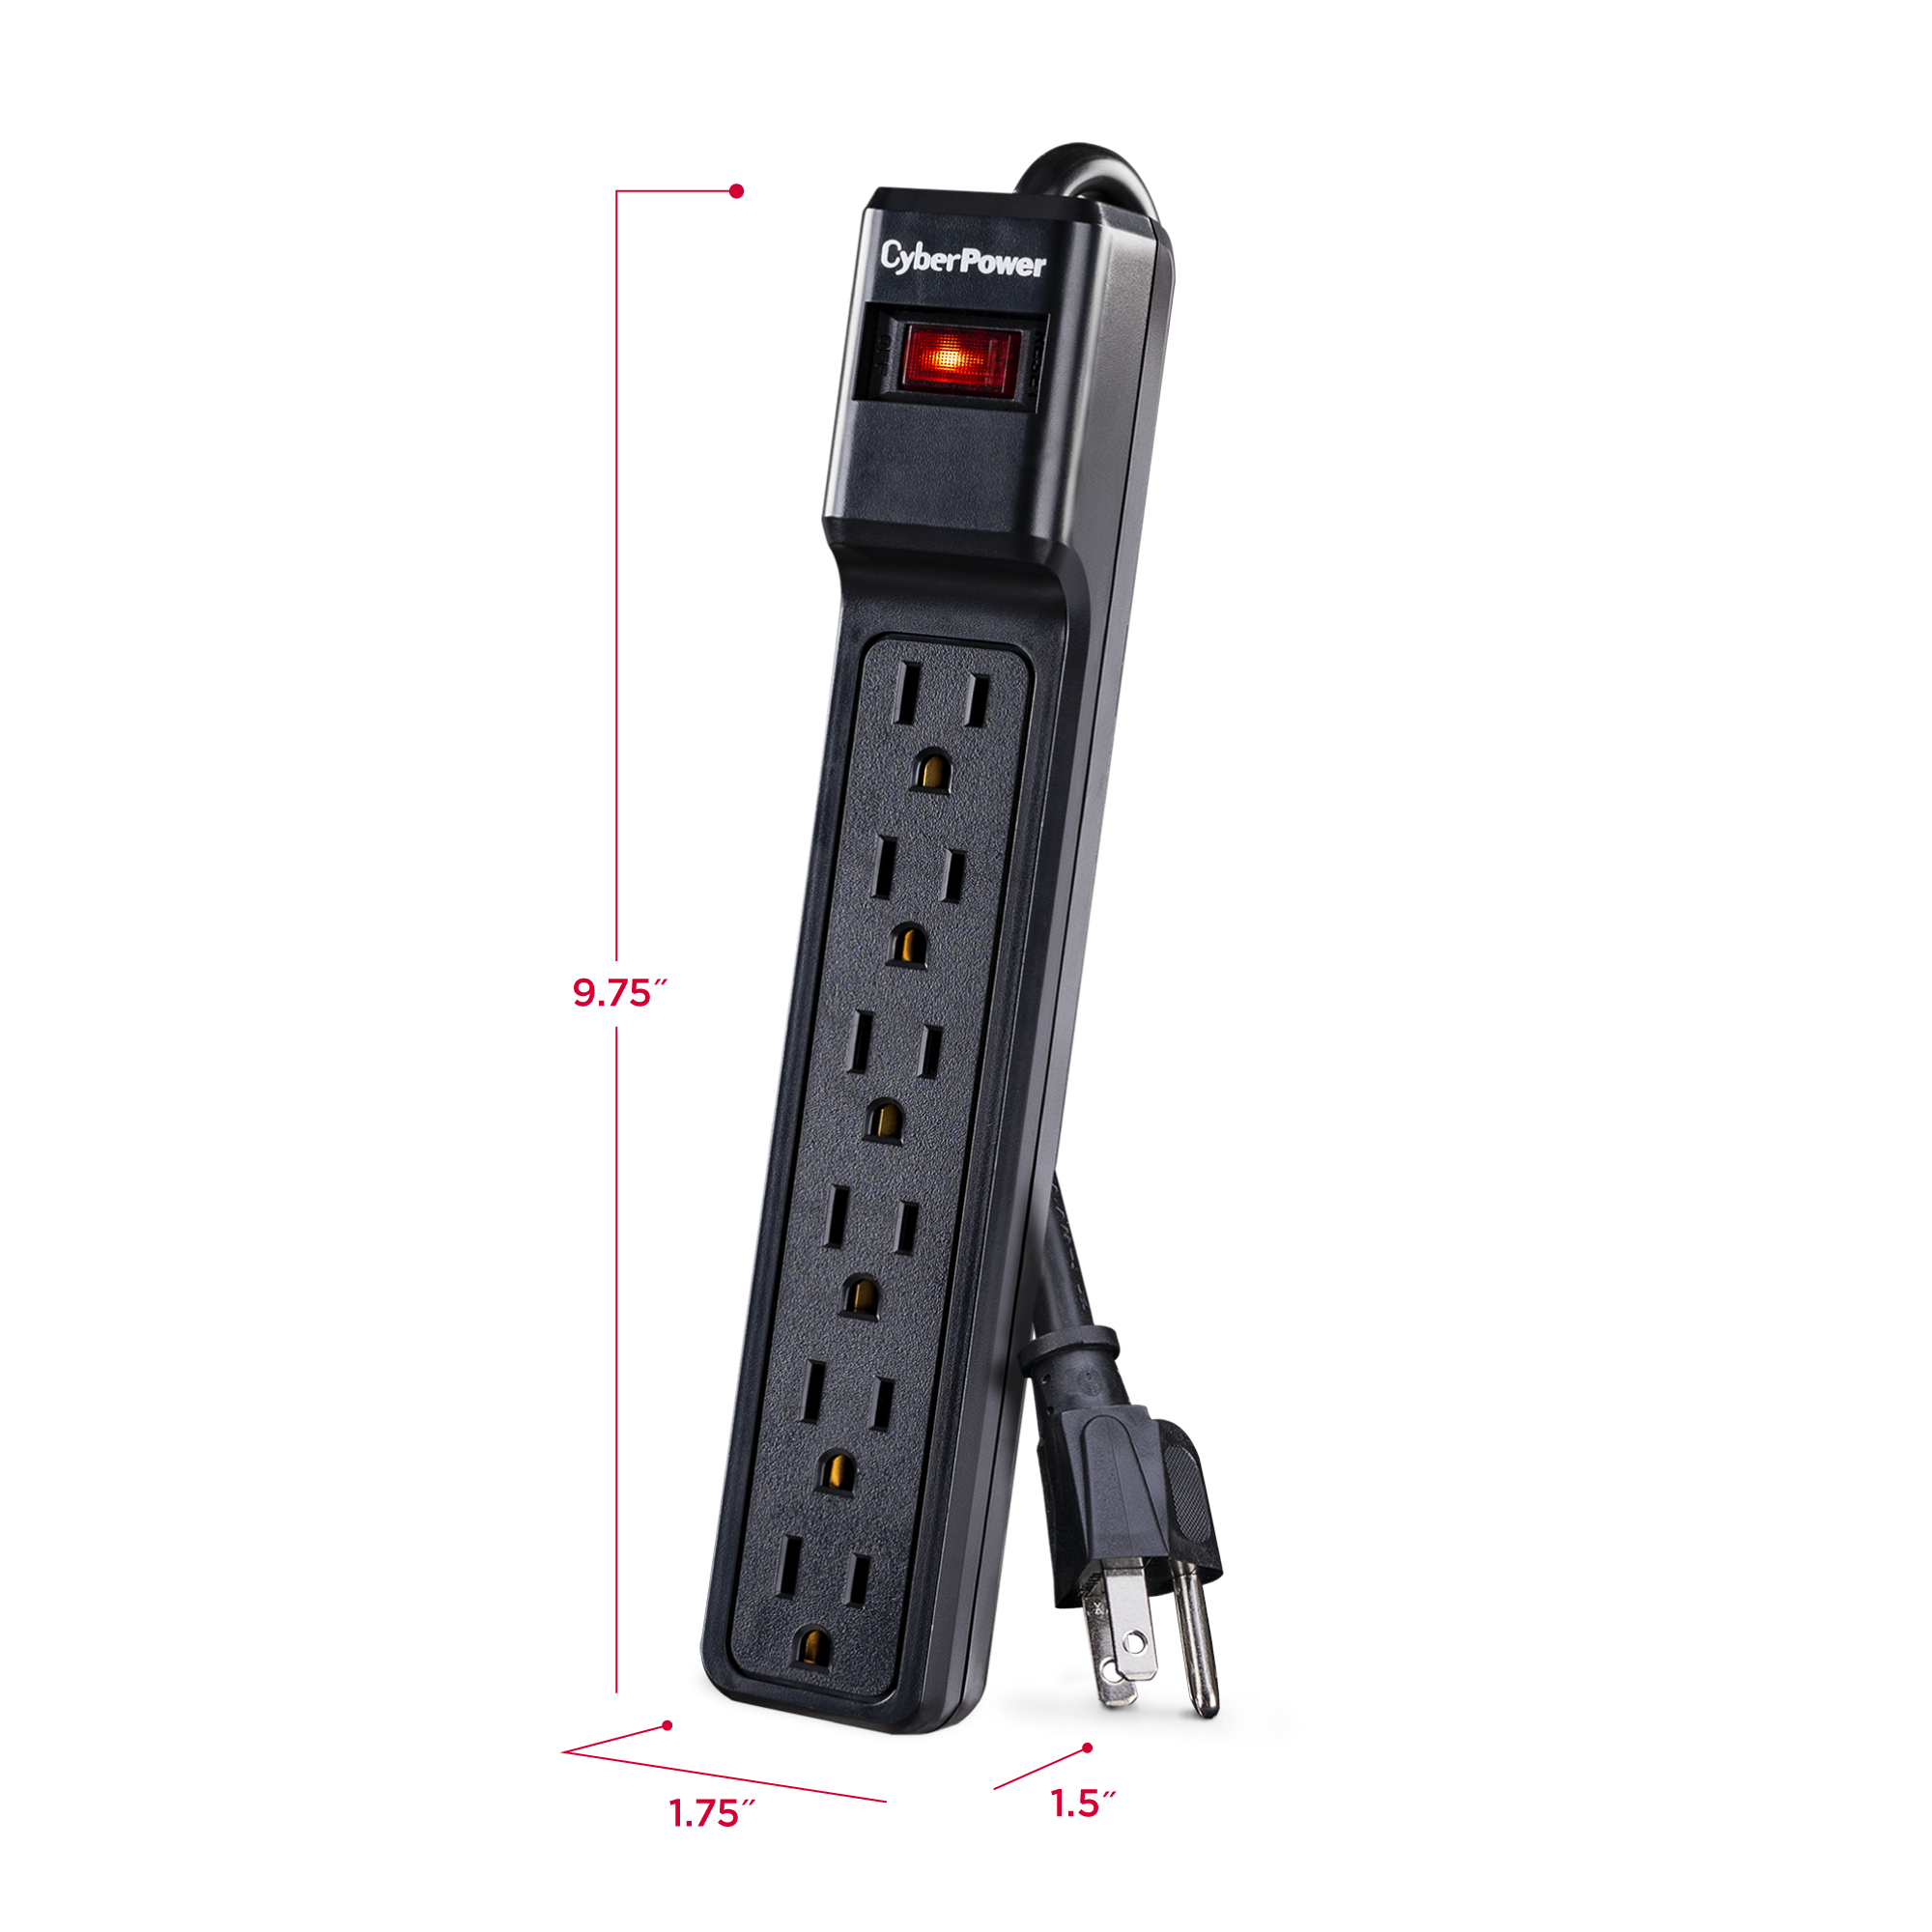 6 Outlets CyberPower CSB604MP6 Essential Surge Protector 900J/125V 4ft Power Cord 6 Pack 